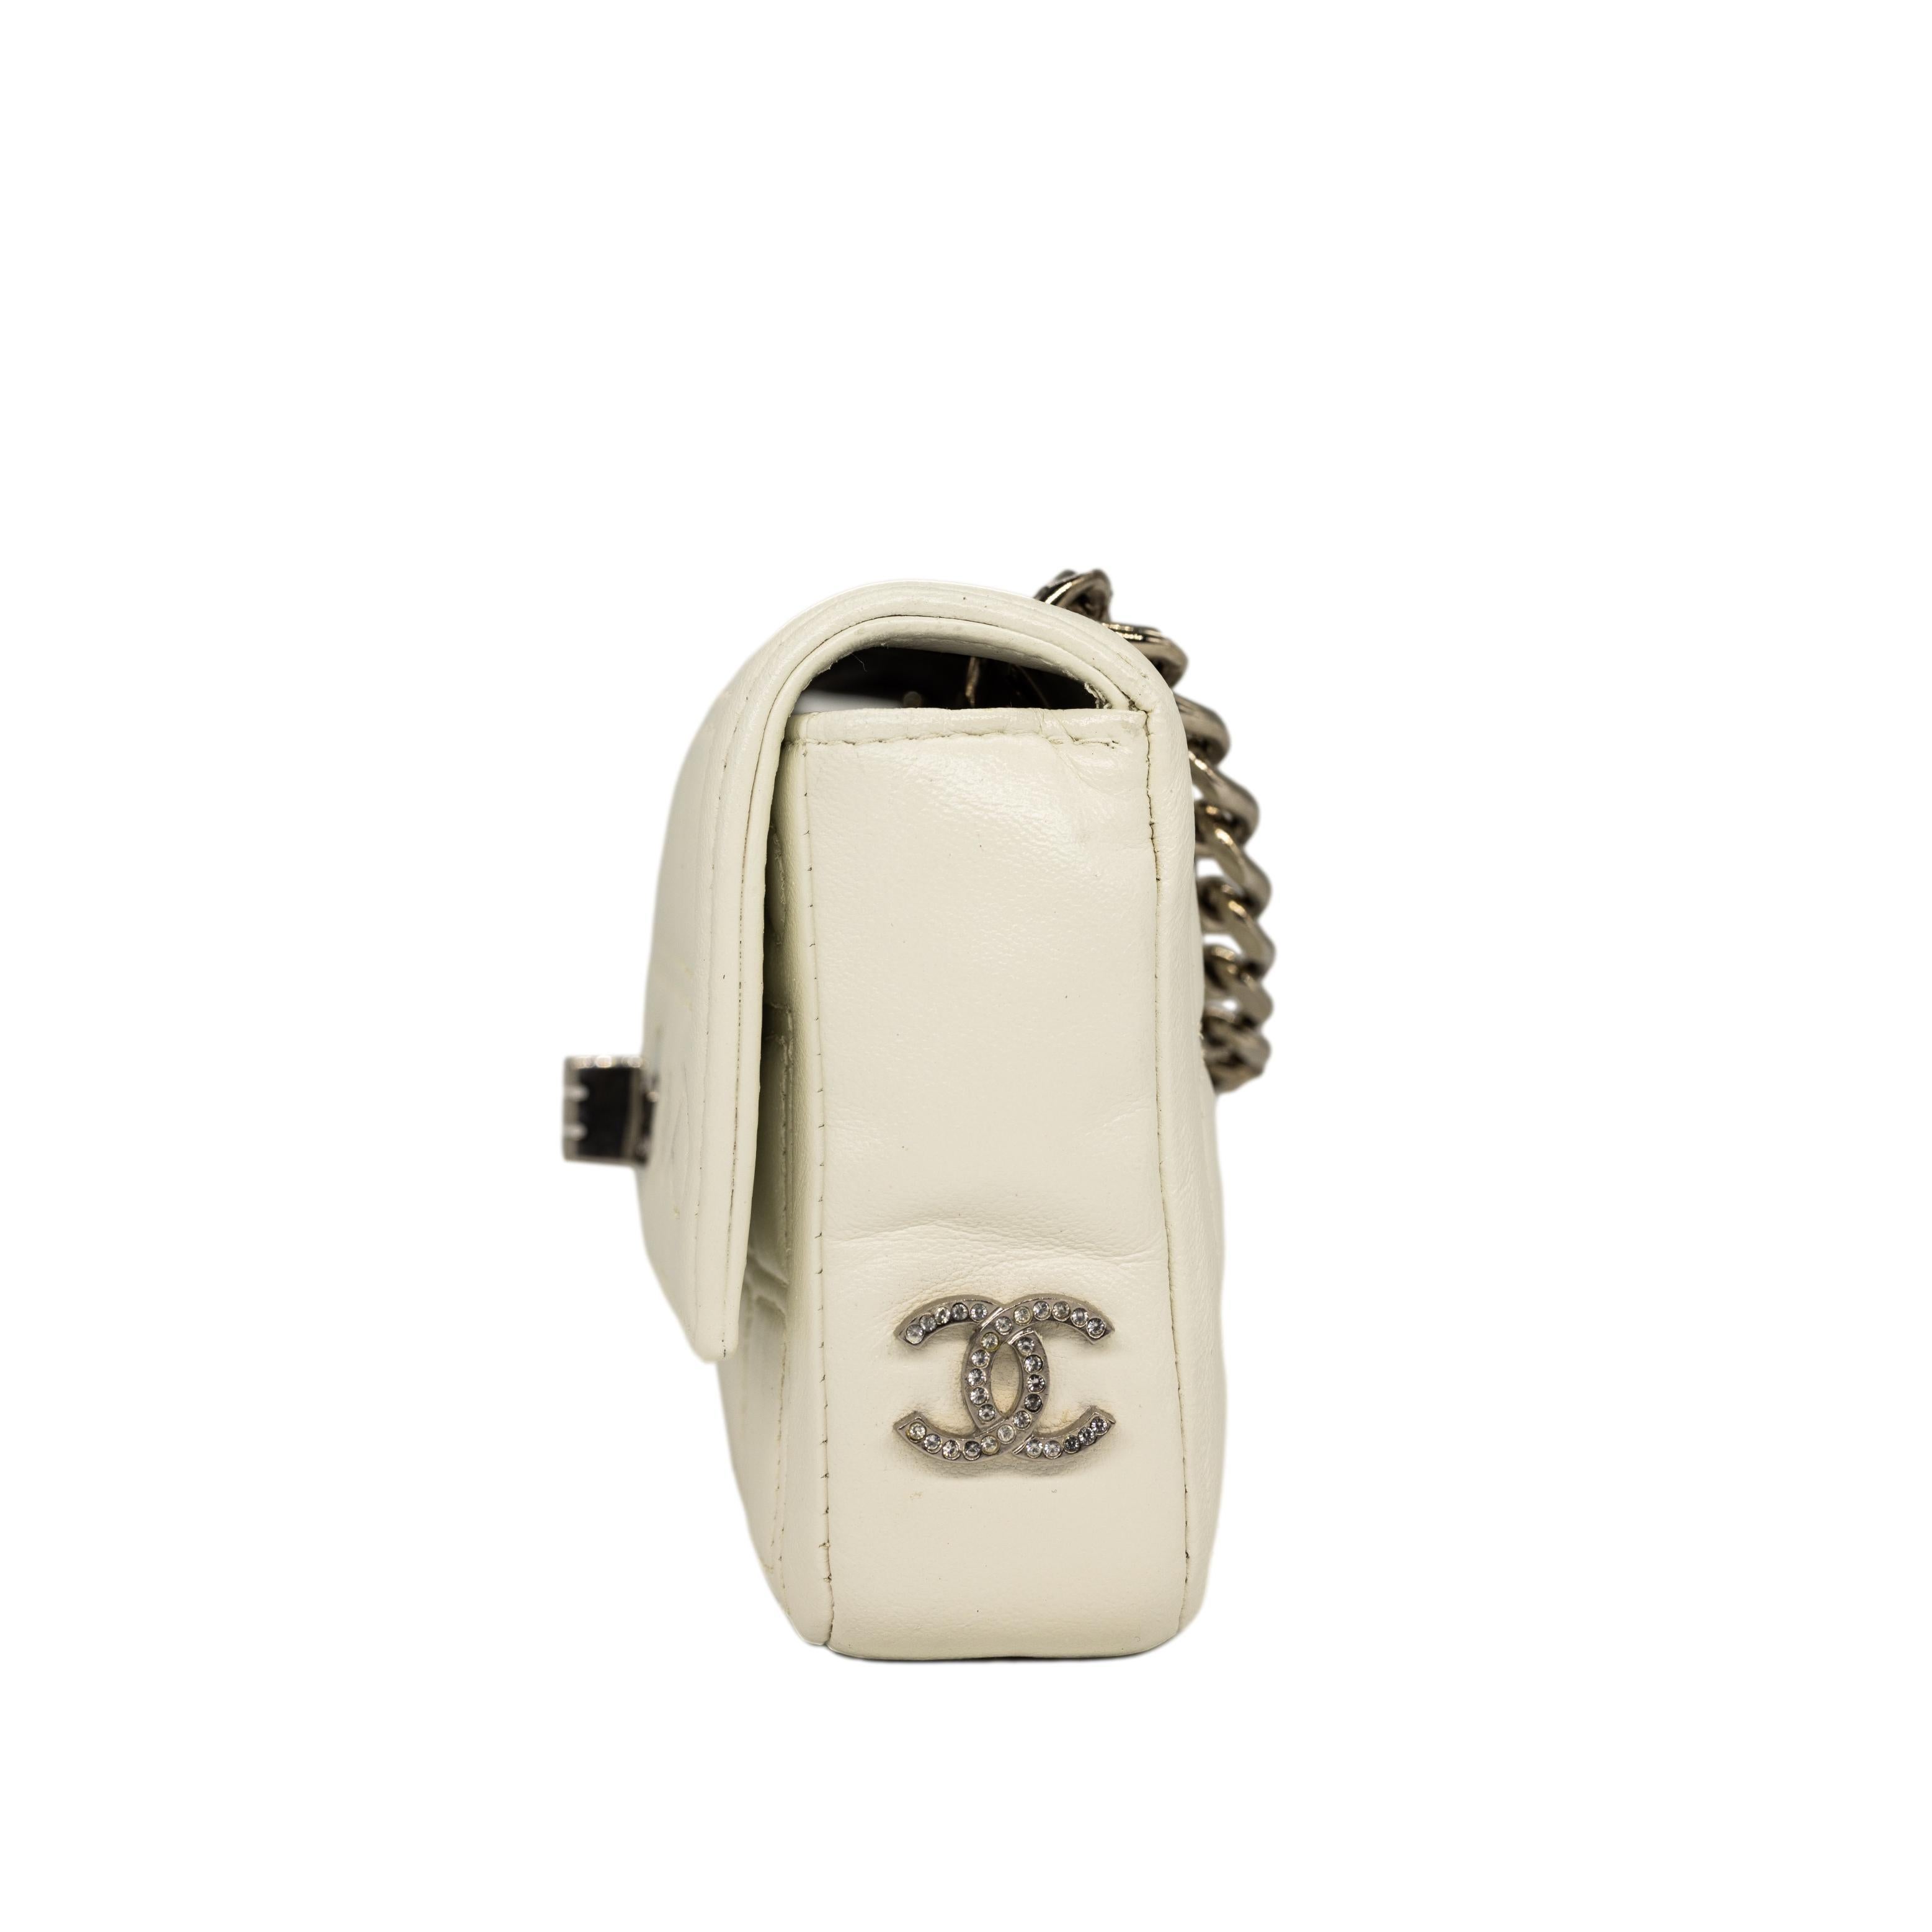 Chanel Limited Edition 2.55 Re-Issue White Mini Chocolate Bar Shoulder Bag, 2002 1